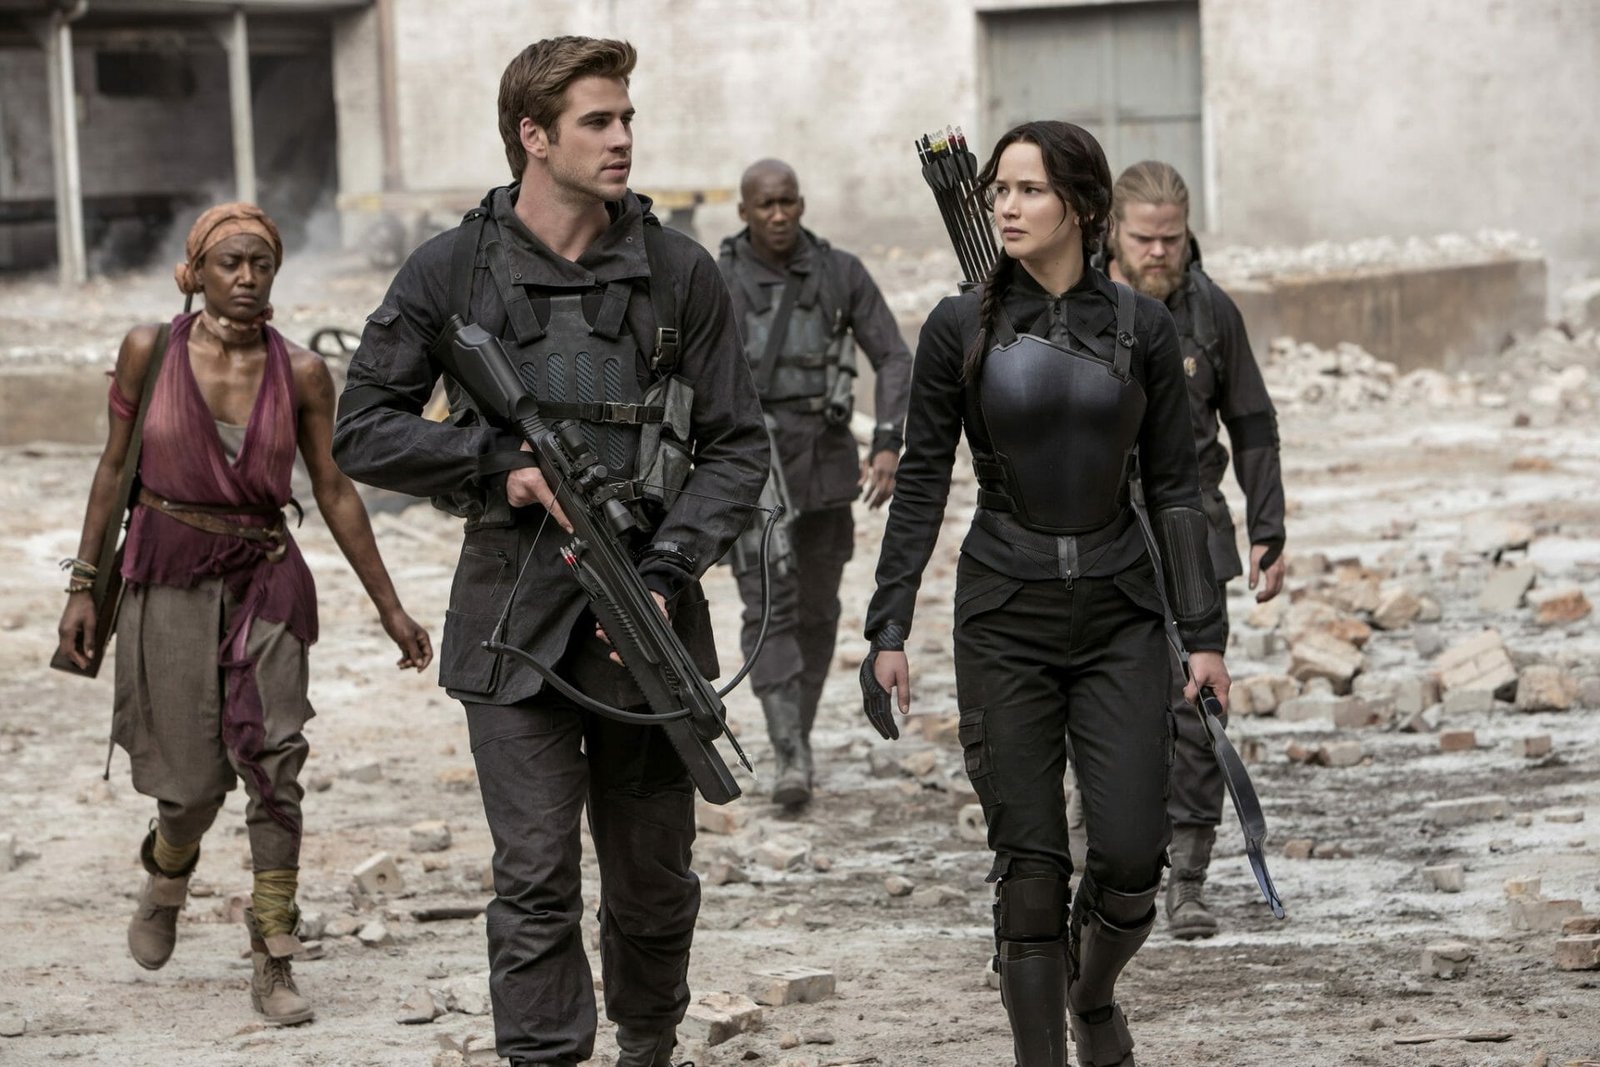 Dystopian movies: The Hunger Games: Mockingjay - Part 1